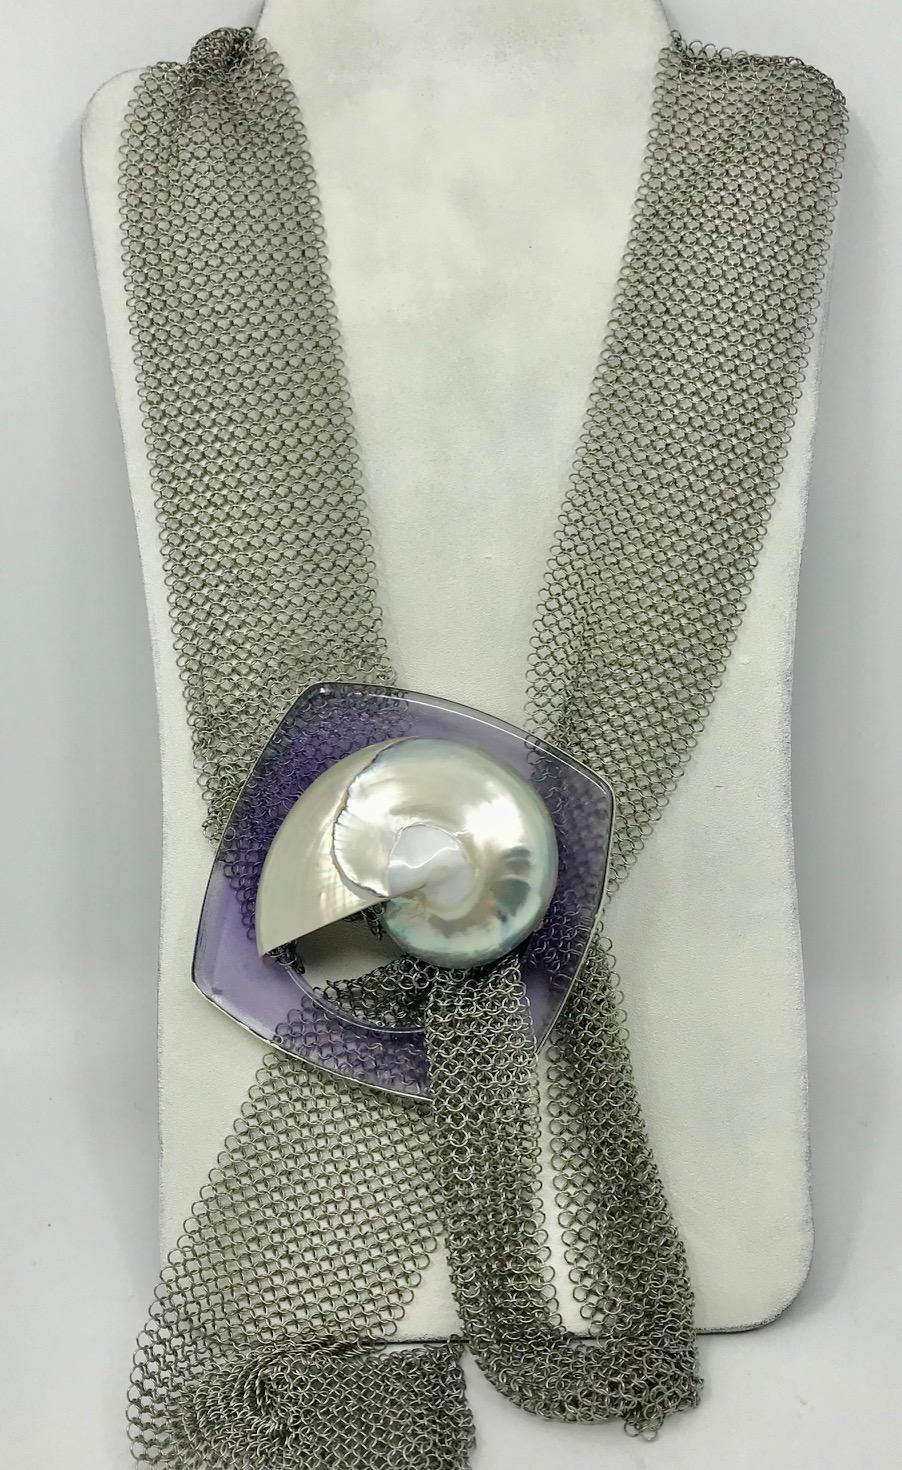  Nautilus Pendant on Stainless Steel chain mail could be worn as a Necklace or as a Belt. The Pendant / Buckle consists of Nautilus shell on purple Resin in Silver frame. All S.Gottwald creations are one of a kind ,hand made , contemporary and eco